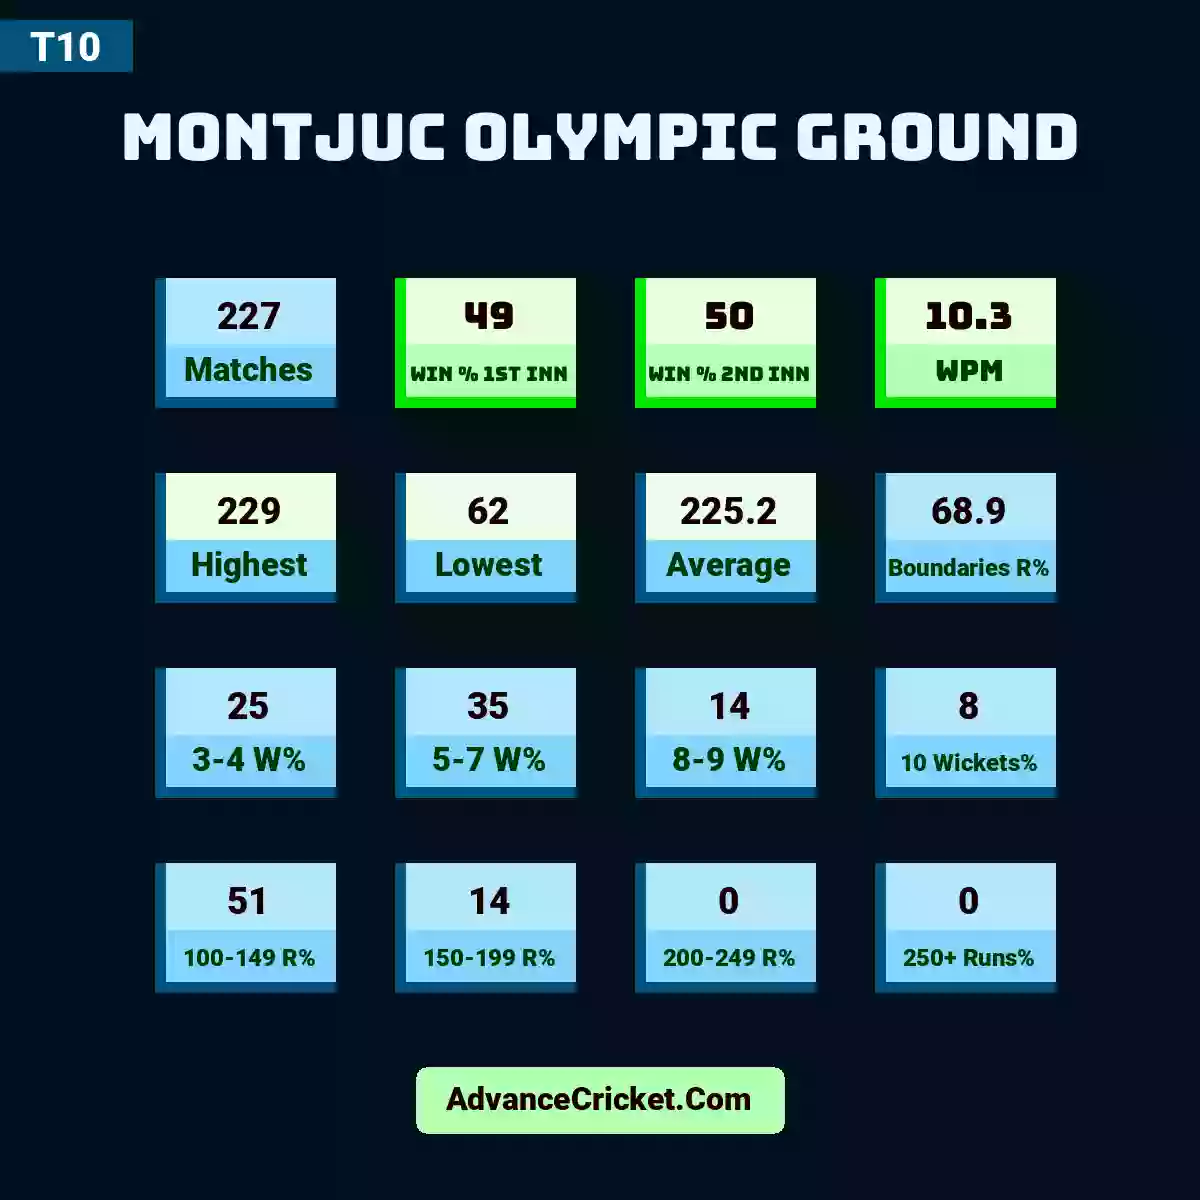 Image showing Montjuc Olympic Ground with Matches: 227, Win % 1st Inn: 49, Win % 2nd Inn: 50, WPM: 10.3, Highest: 229, Lowest: 62, Average: 225.2, Boundaries R%: 68.9, 3-4 W%: 25, 5-7 W%: 35, 8-9 W%: 14, 10 Wickets%: 8, 100-149 R%: 51, 150-199 R%: 14, 200-249 R%: 0, 250+ Runs%: 0.